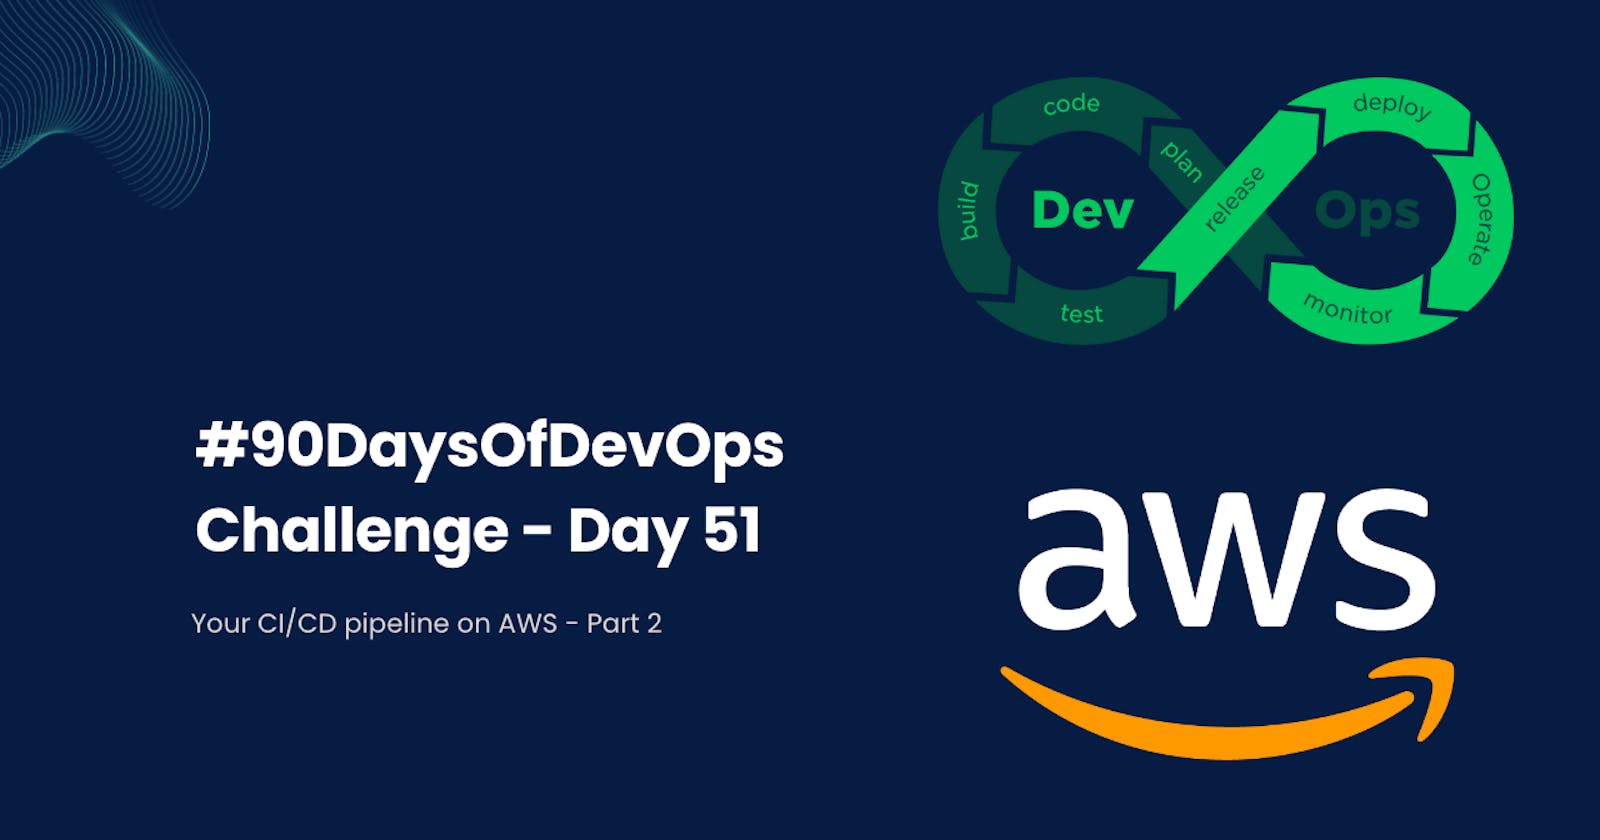 #90DaysOfDevOps Challenge - Day 51 - Your CI/CD pipeline on AWS - Part 2 🚀 ☁